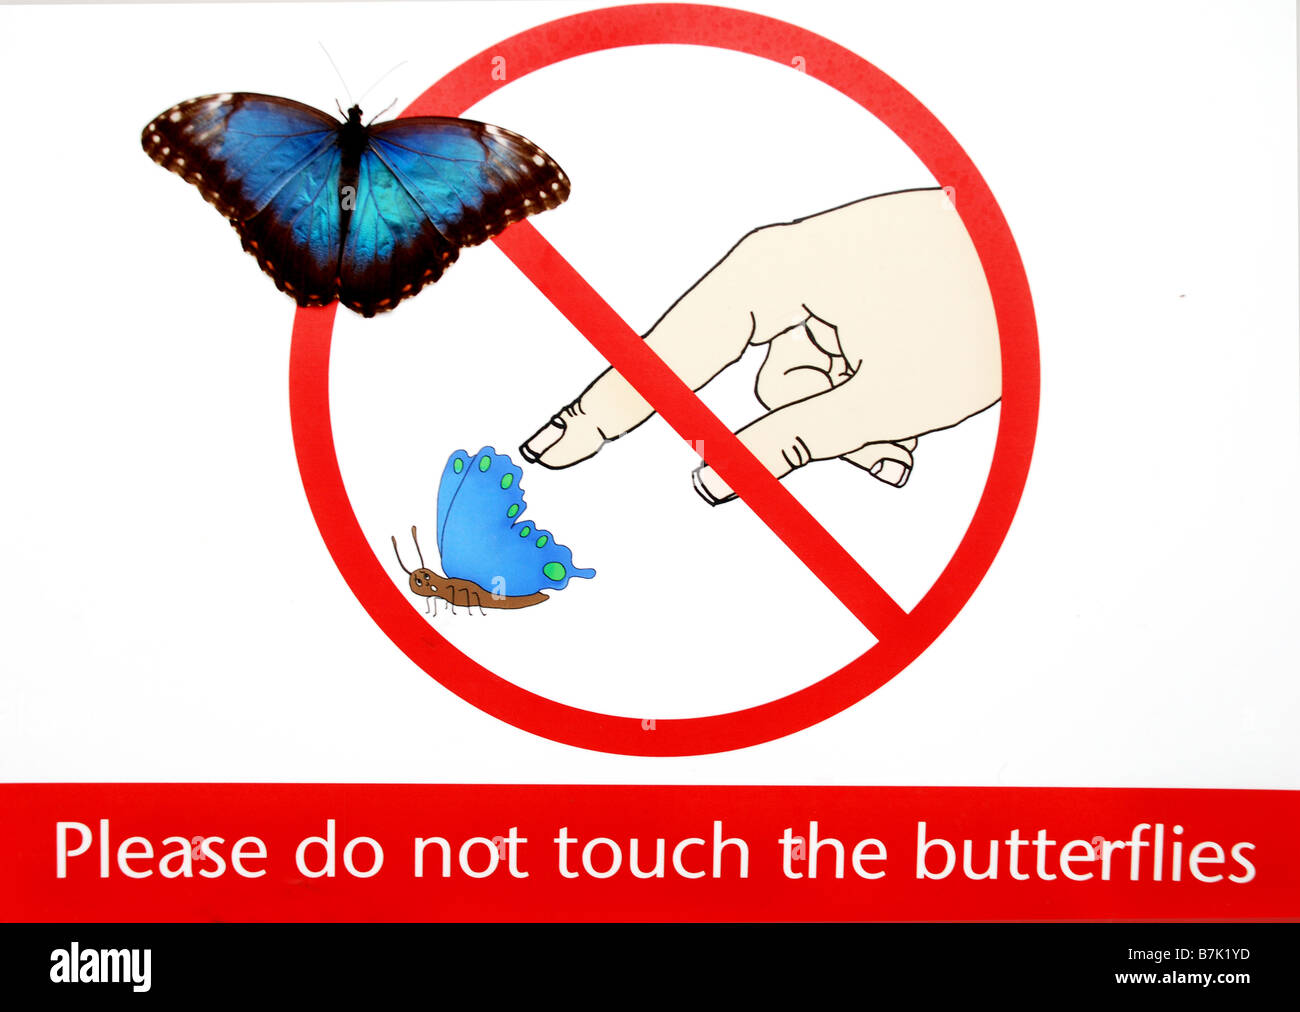 Butterfly, do not touch the butterflies - notice board Stock Photo